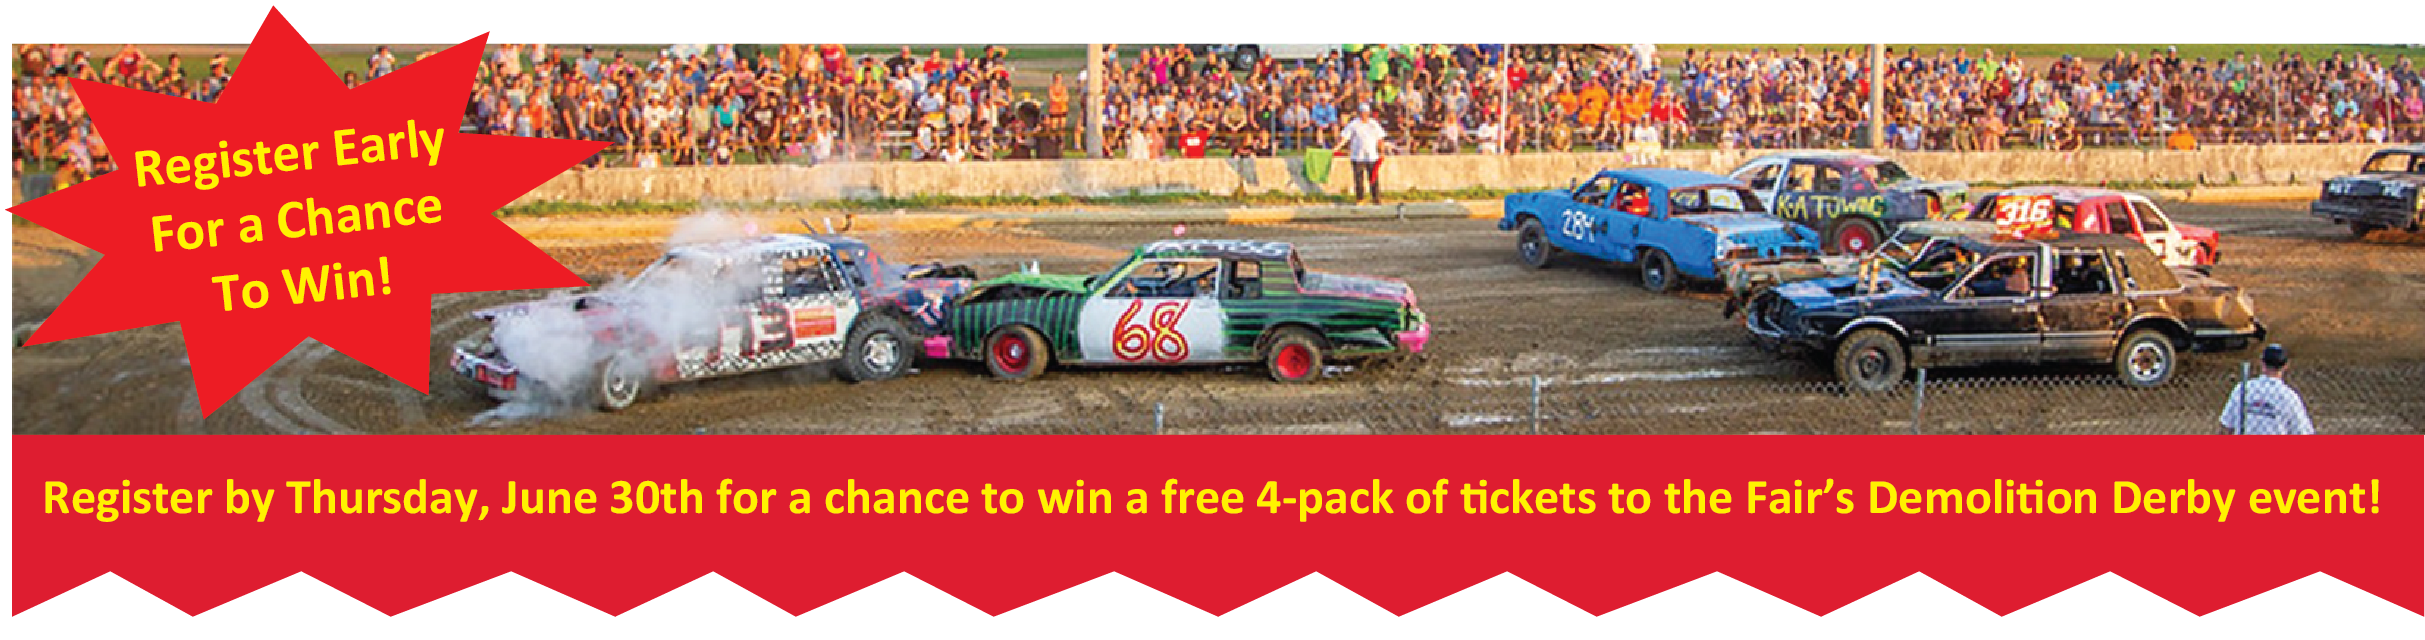 Image of demolition derby at NJ State Fair, with text reading: Register Early For a Chance to Win! Register by Thursday, June 30th for a chance to win a free 4-pack of tickets to the Fair's Demolition Derby event!